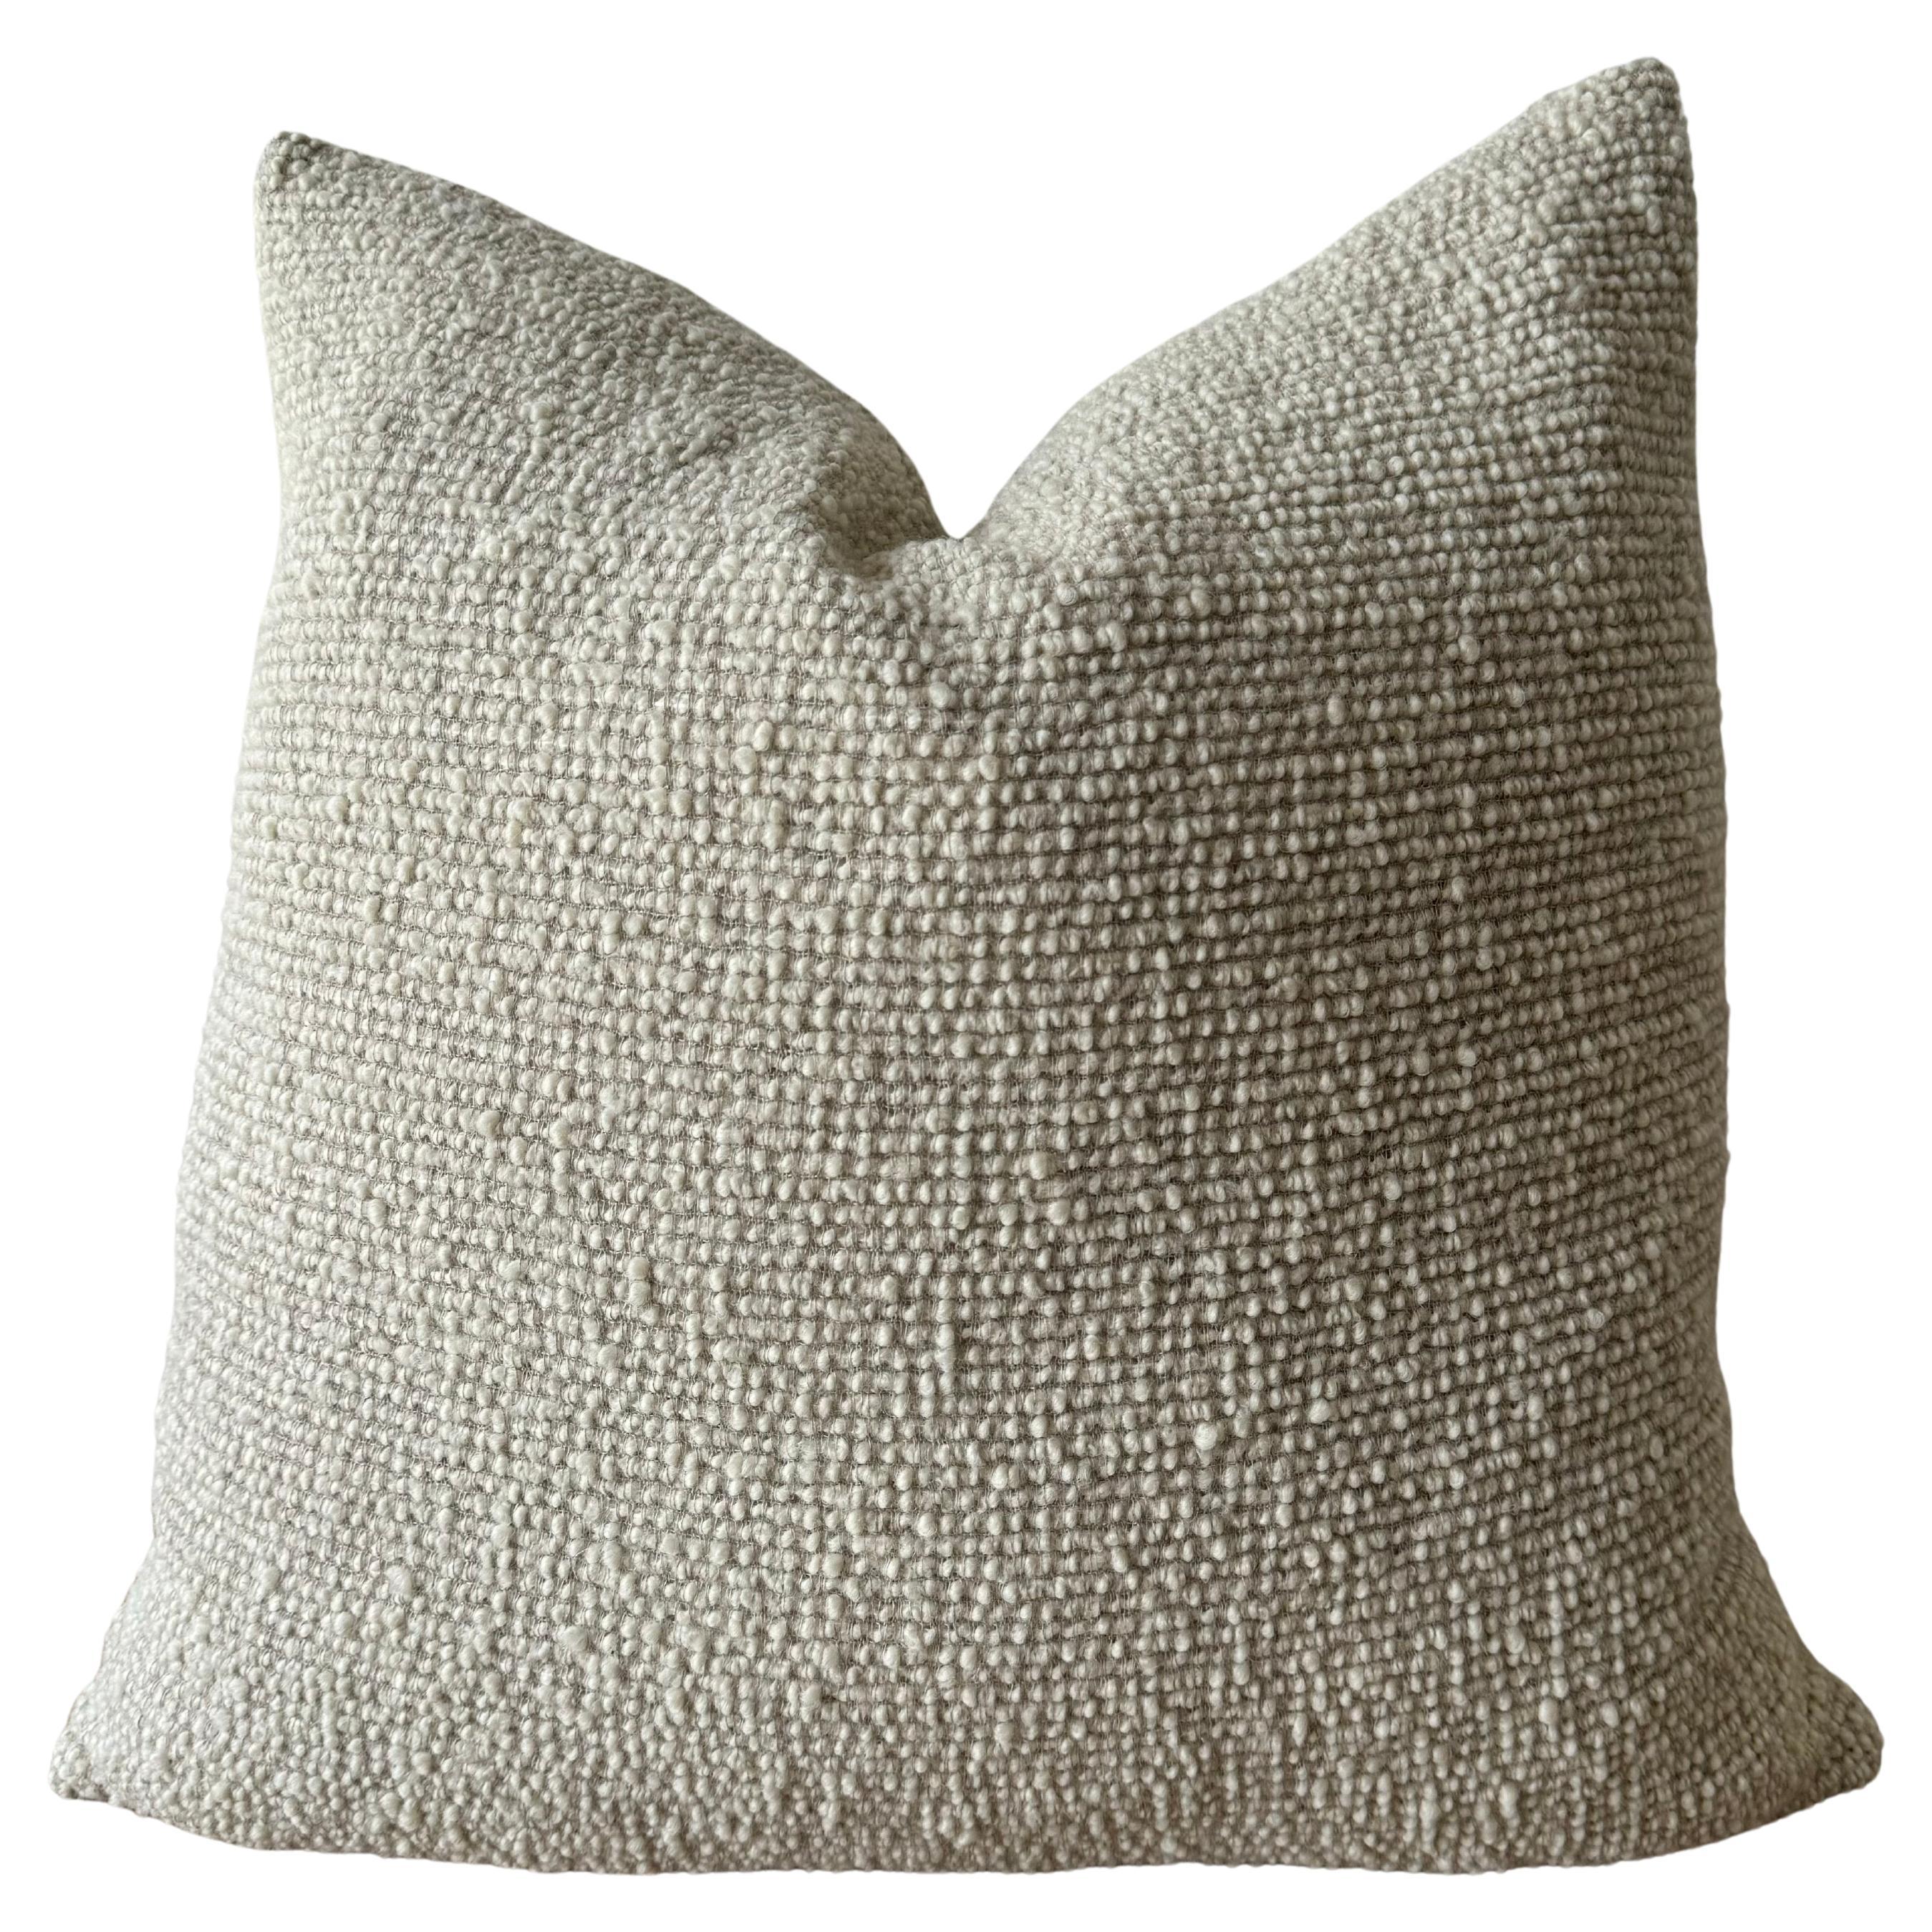 Custom Made Belgium Wool Accent Pillow For Sale